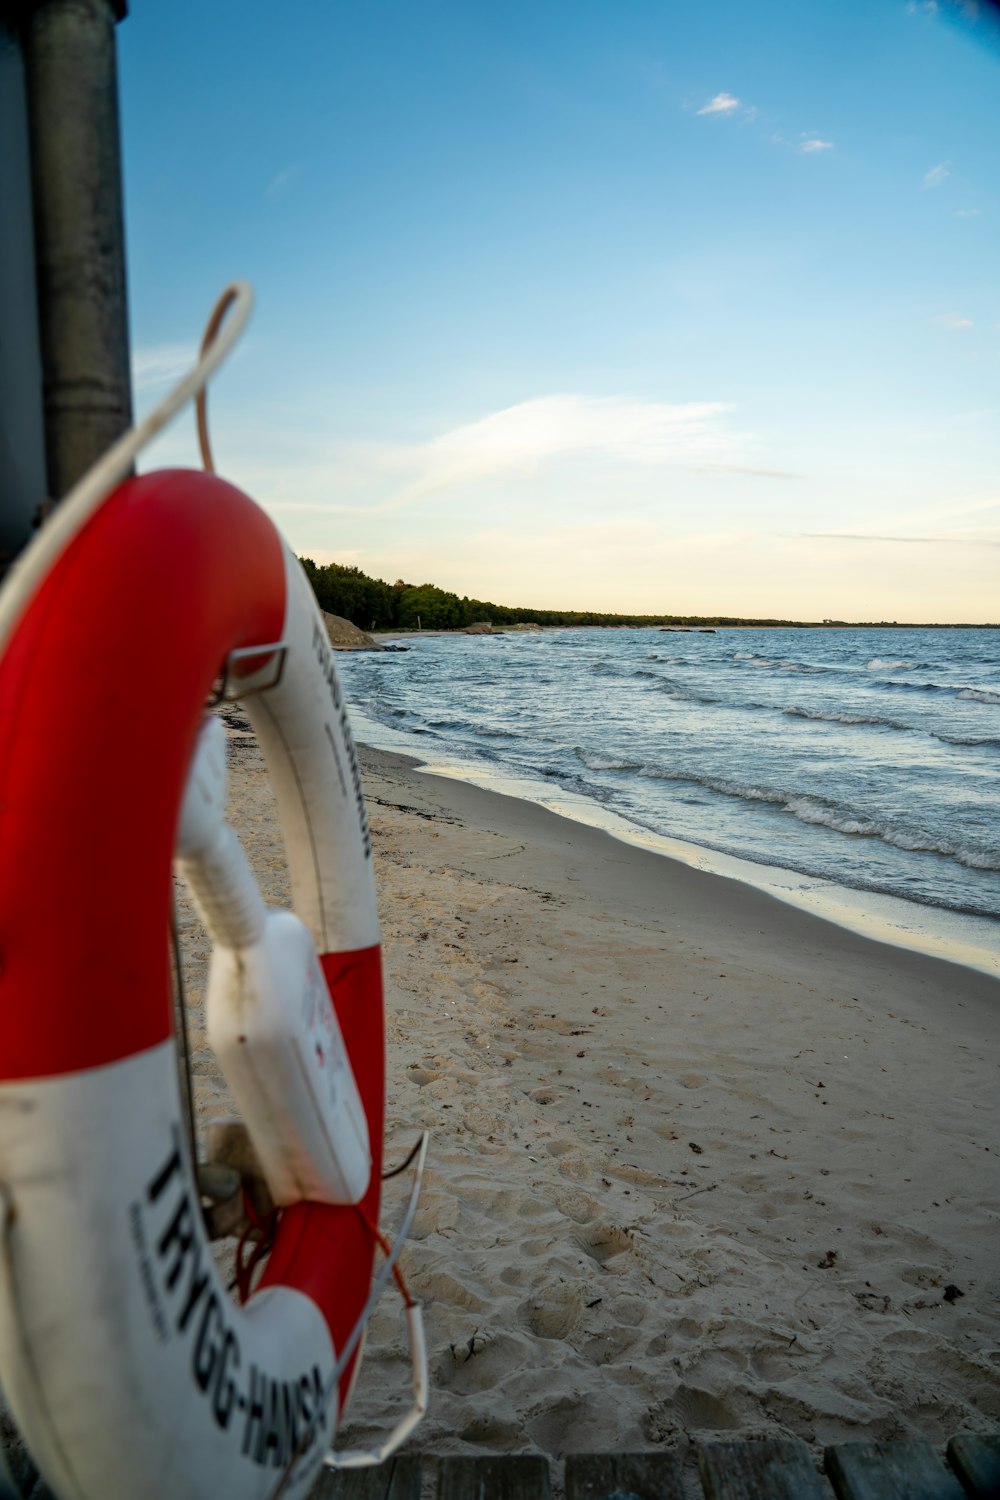 a life preserver sitting on the beach next to the ocean